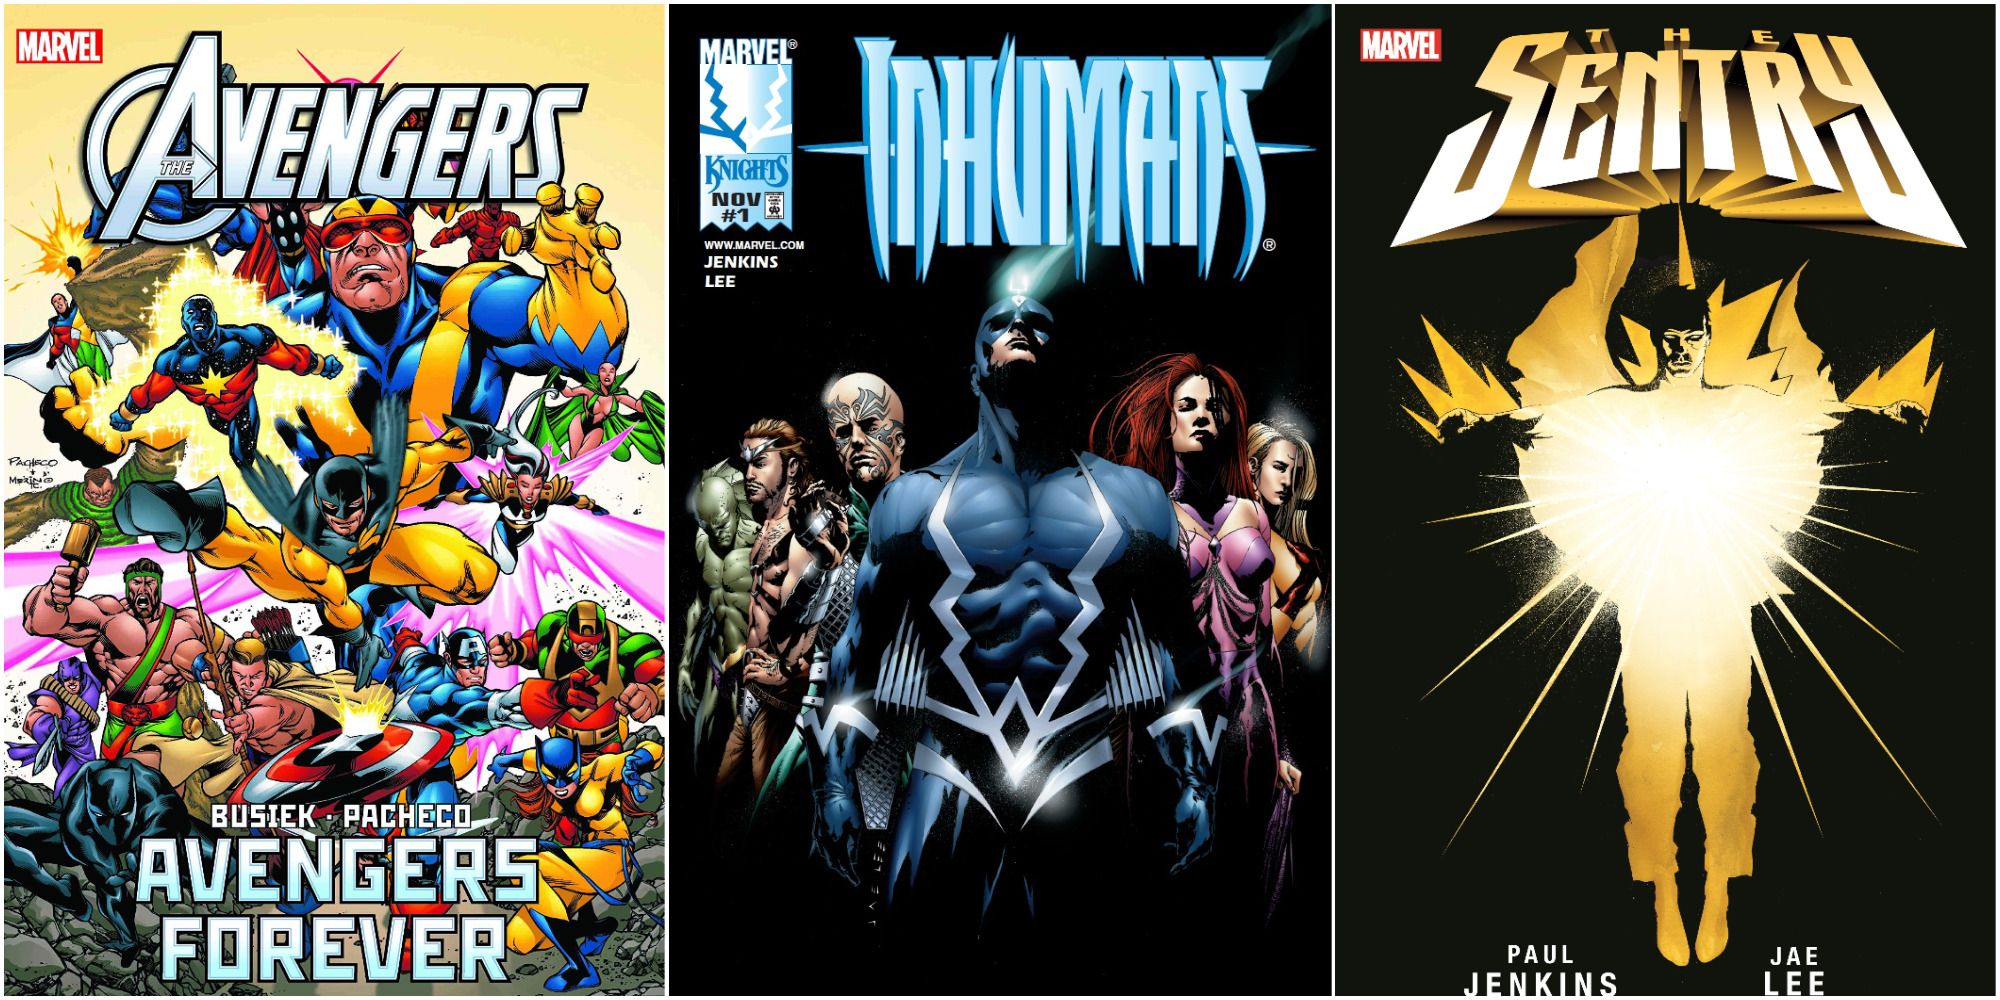 Avengers Forever, The Inhumans, and The Sentry